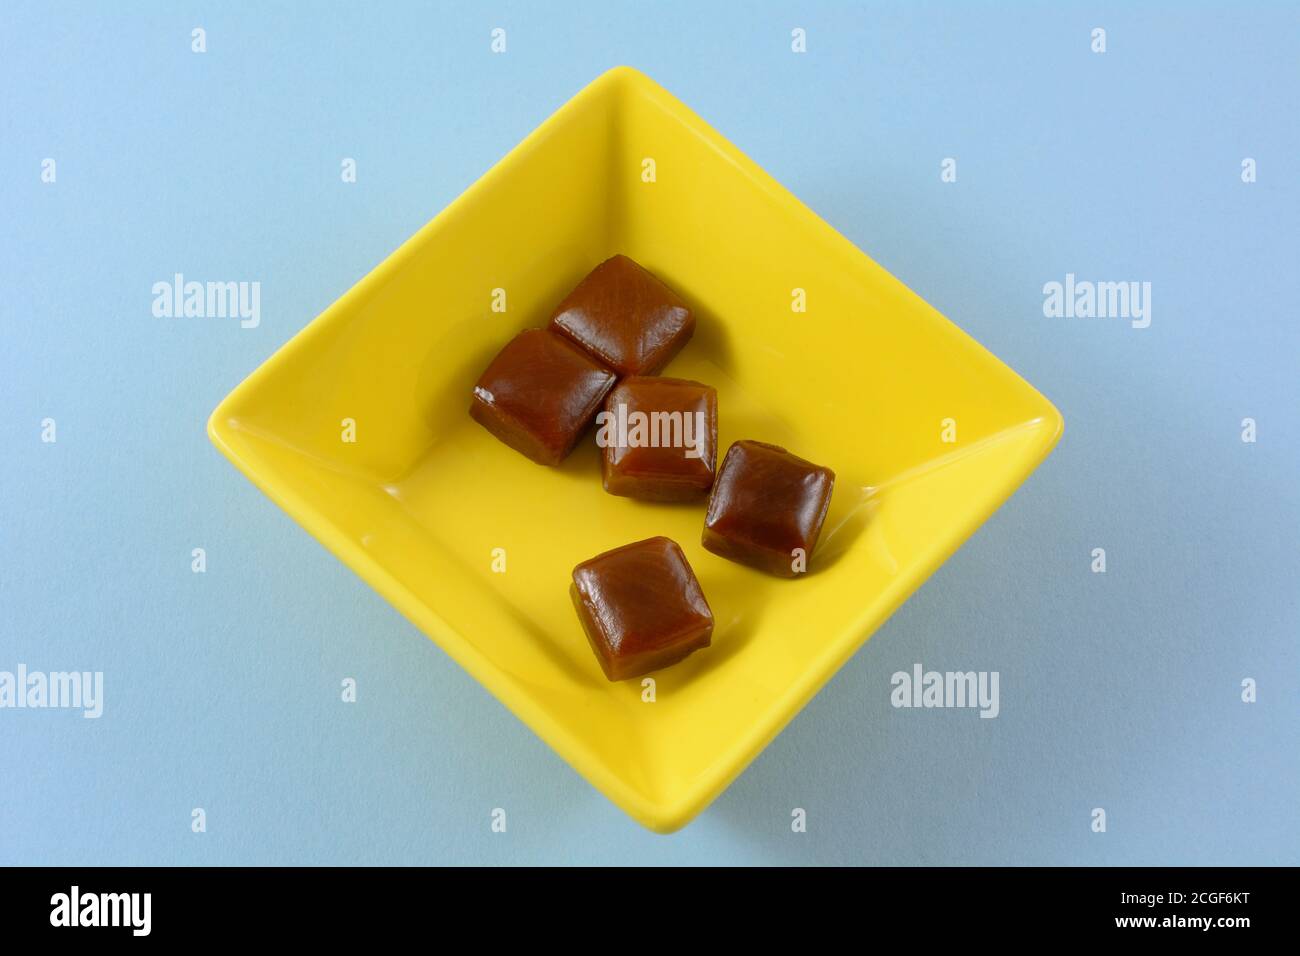 Coffee flavored hard candy in yellow candy dish on blue background Stock Photo